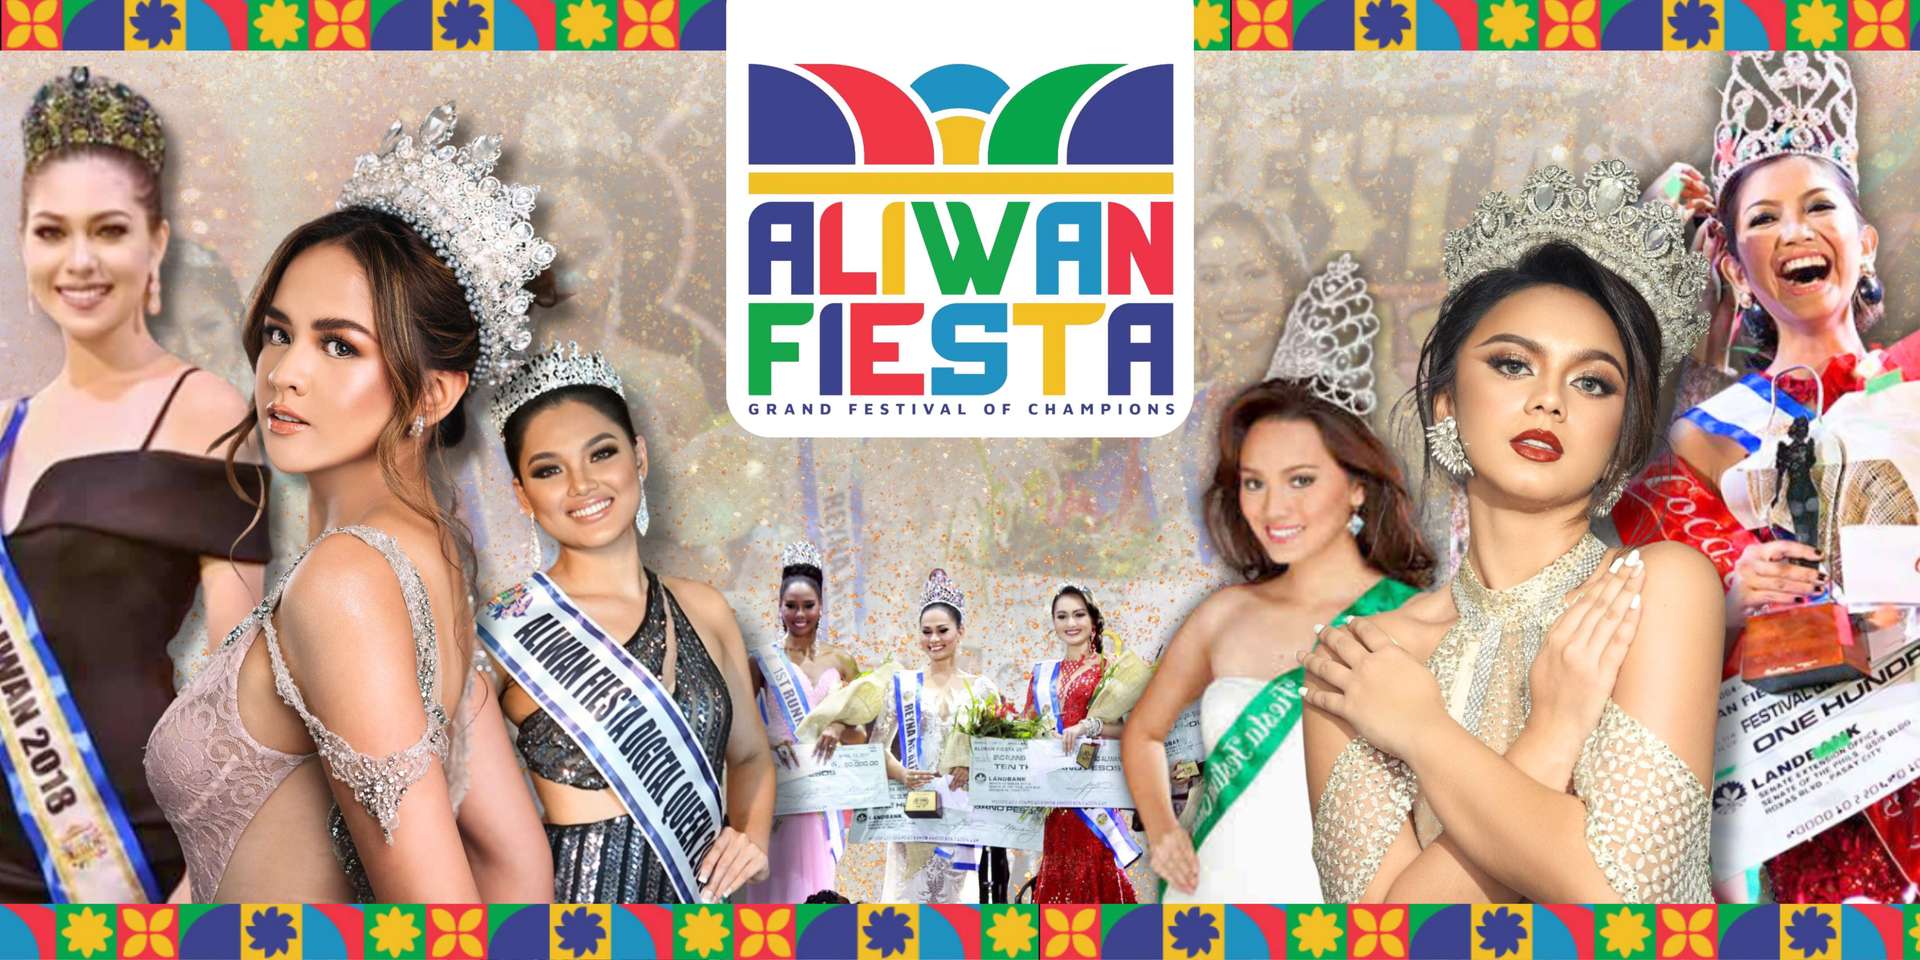 Search for new Festival Queen returns: Reyna ng Aliwan to celebrate beauty, diversity, Filipino heritage